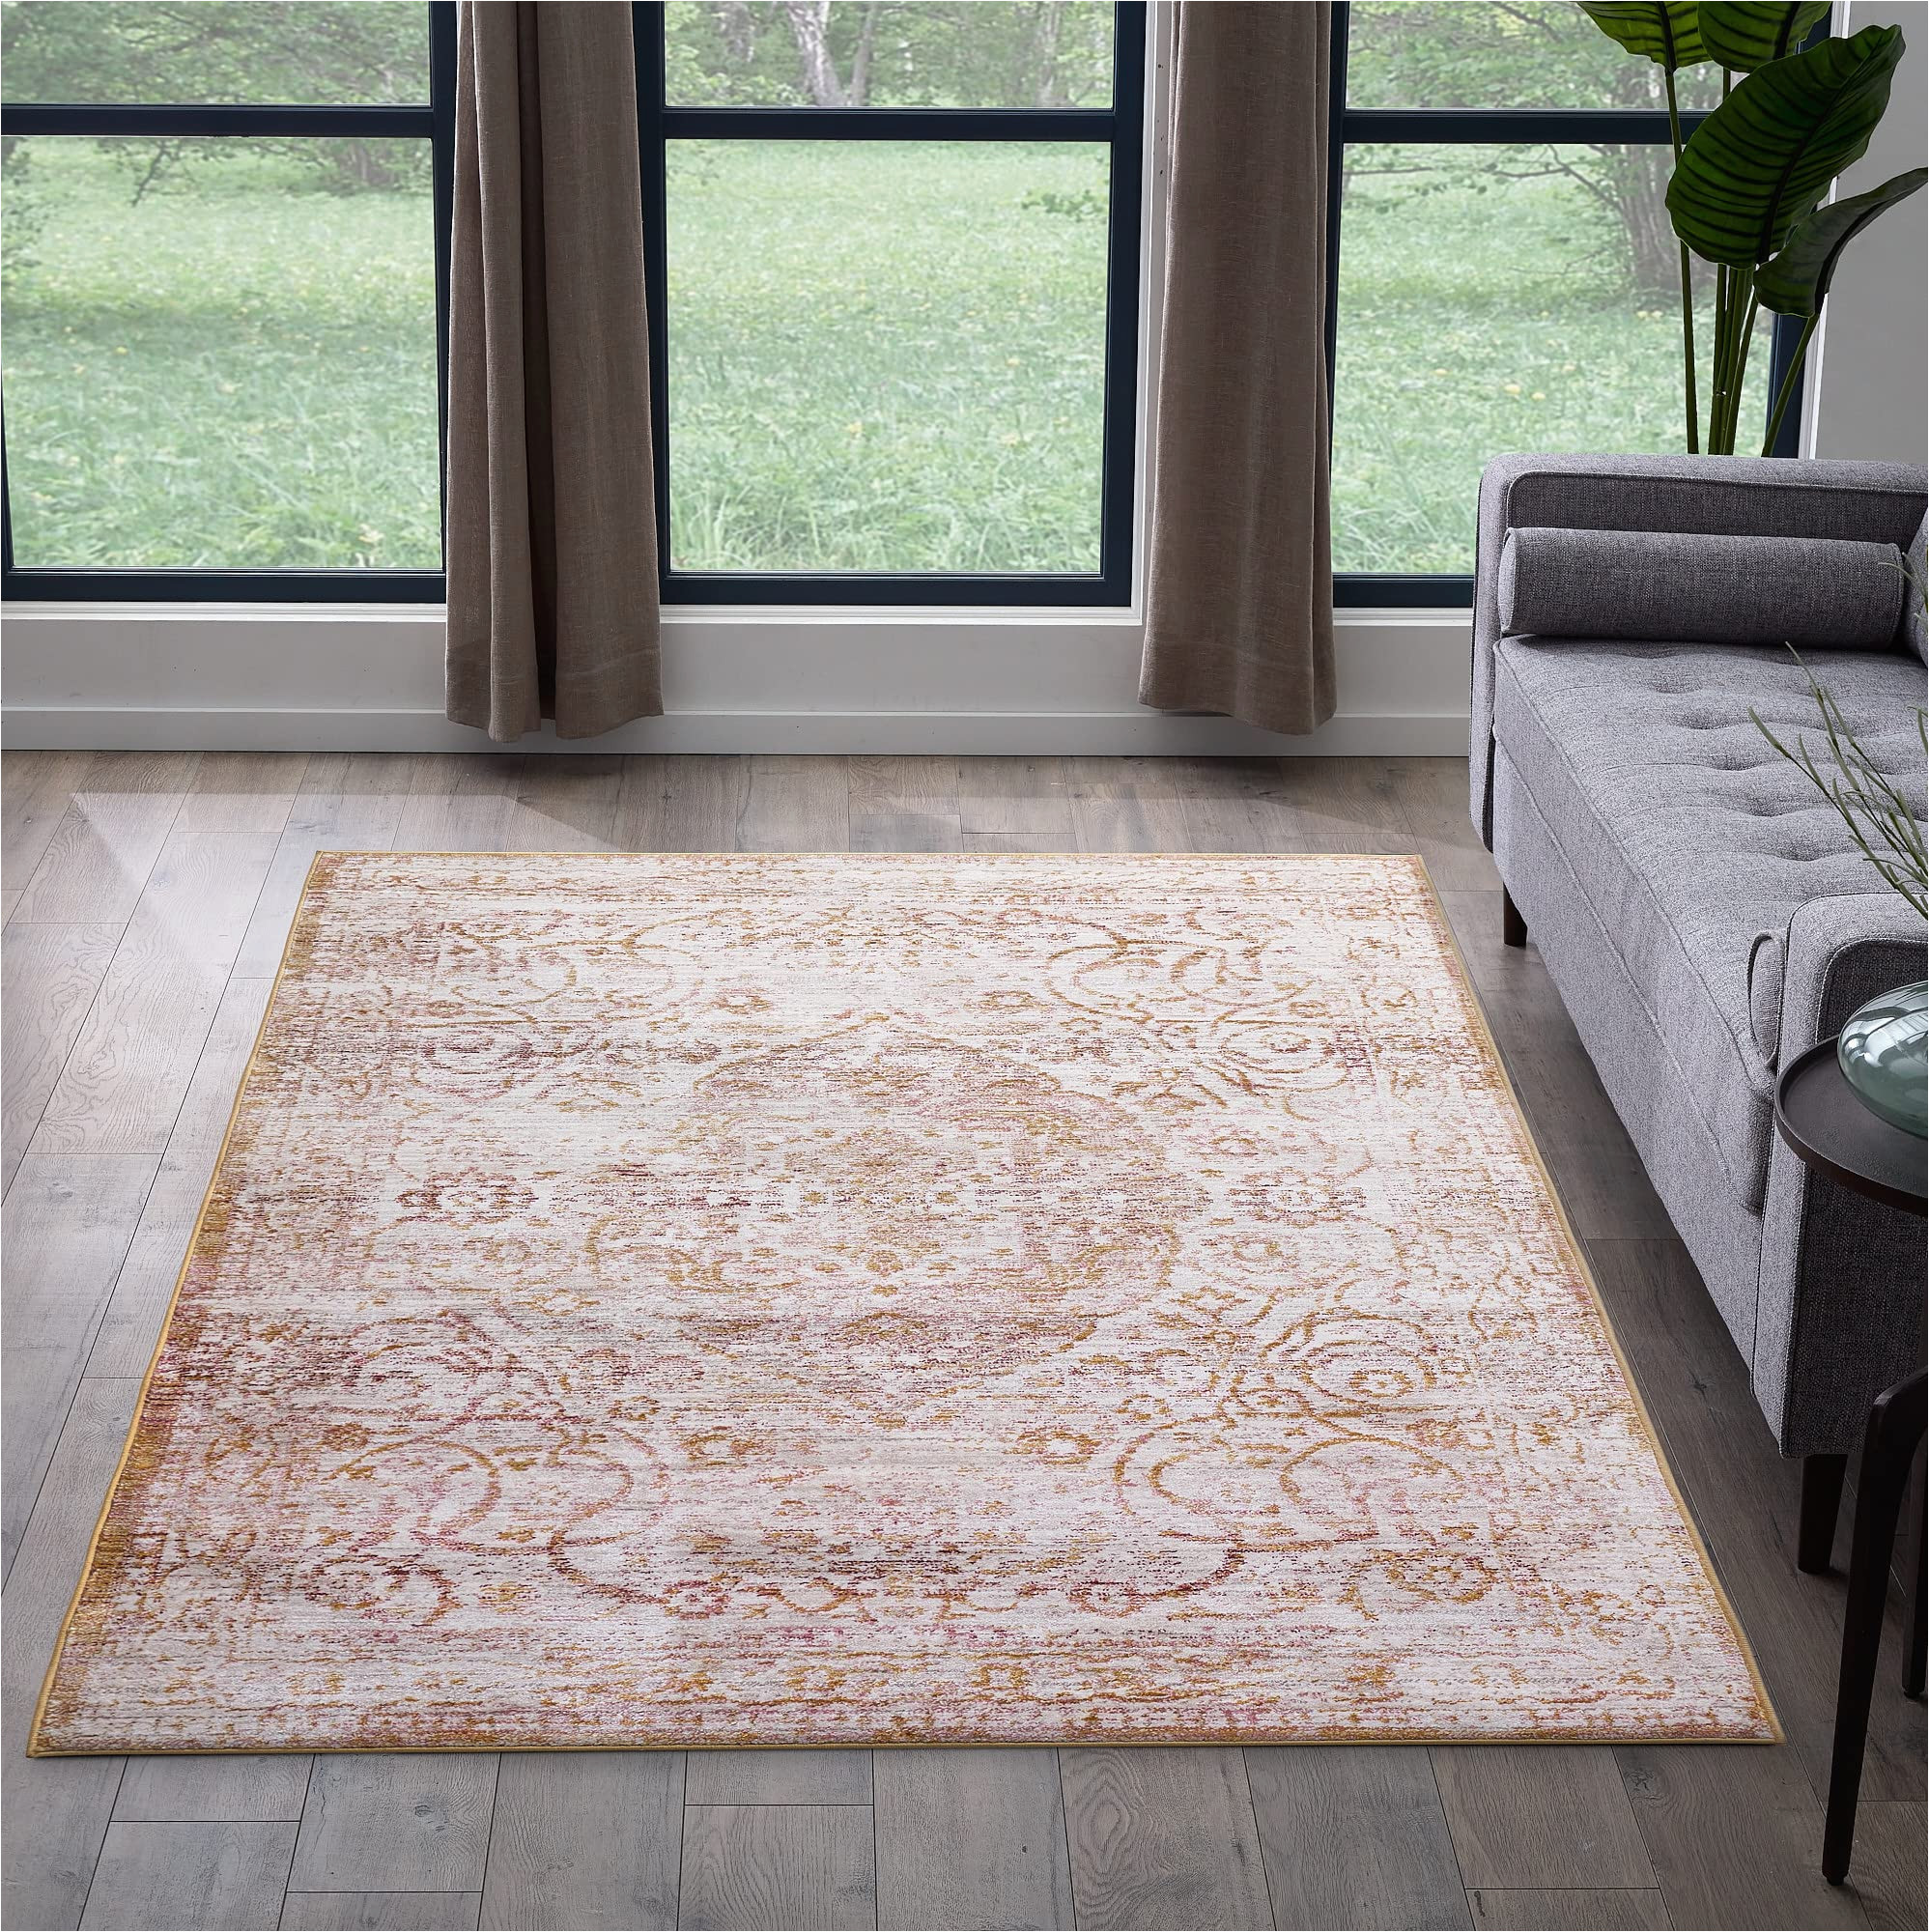 Cheap 3 X 5 area Rugs Edenbrook area Rugs for Living Room – Cream area Rug – Thick Pile Perfect for High Traffic areas, 3×5 Rug